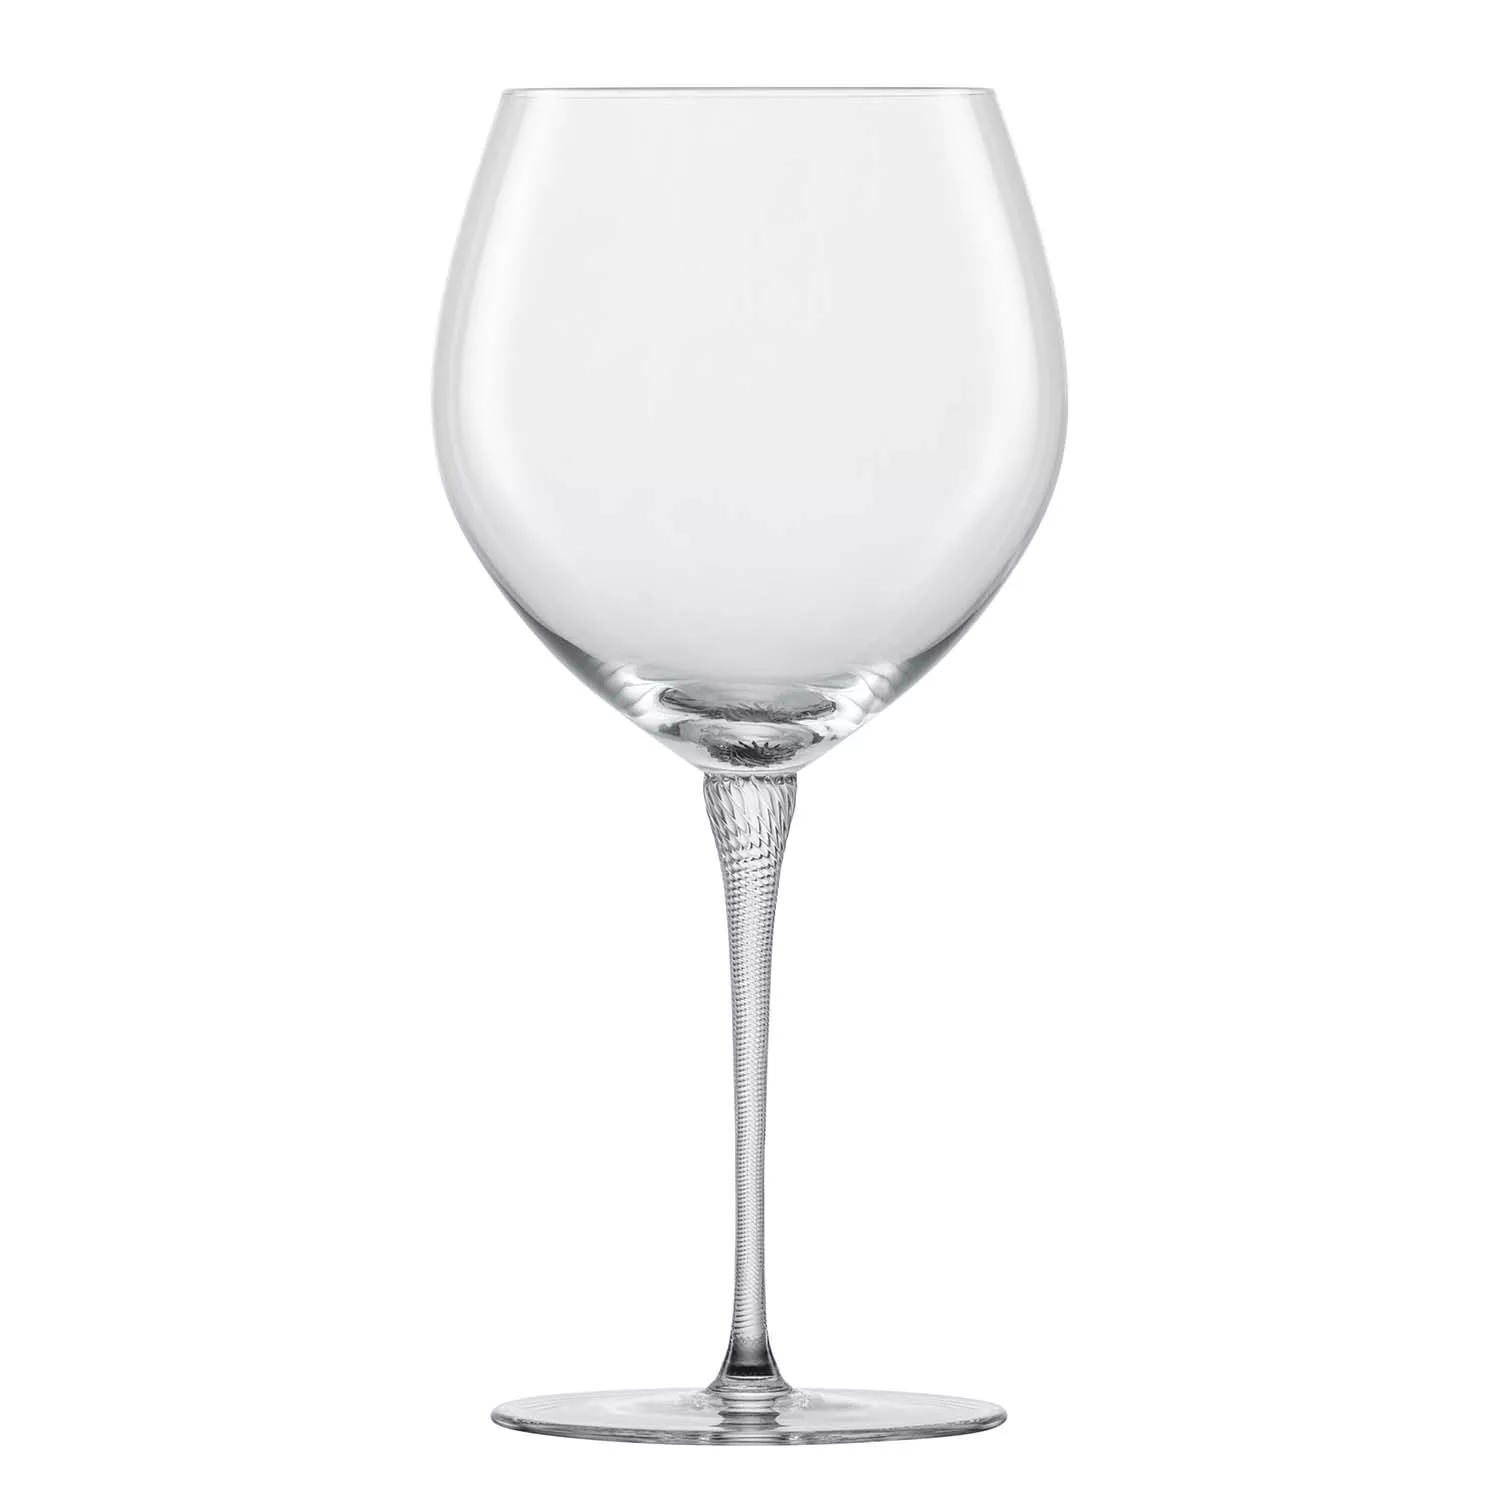 Zwiesel Glas Handmade Highness Soft Red, Set of 2